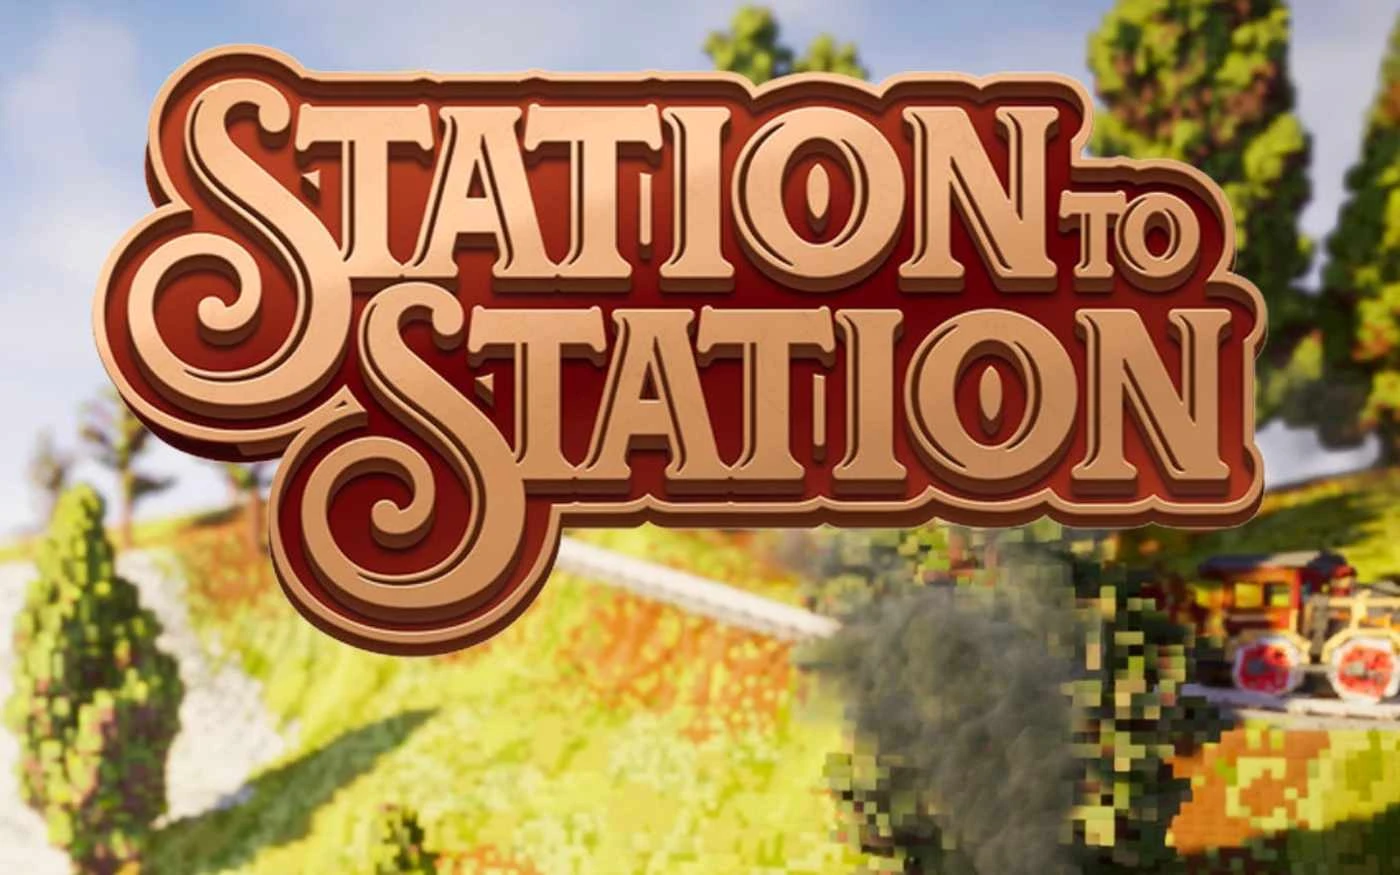 Station To Station Wallpaper And Images.webp